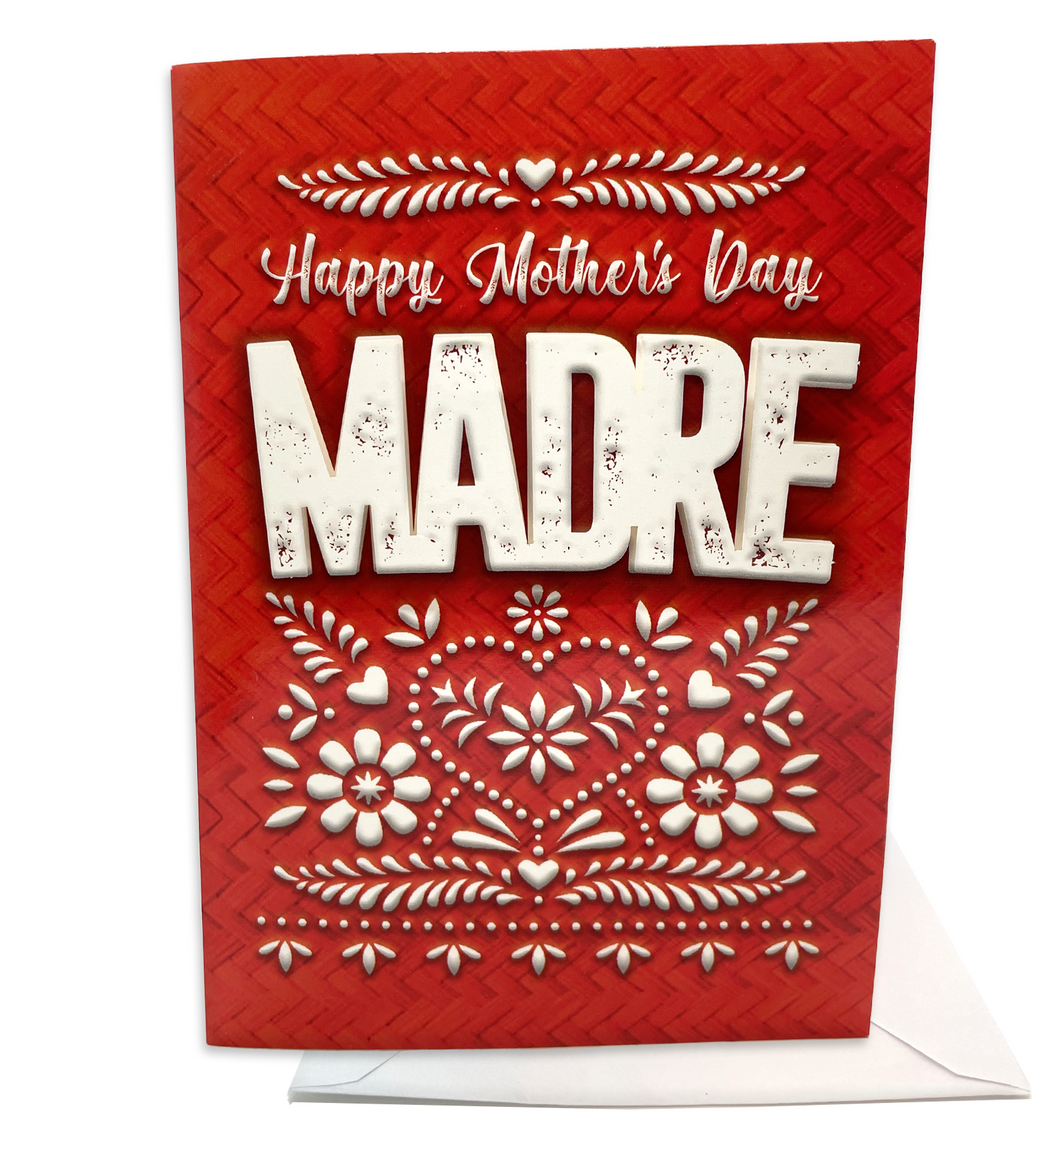 Mexican Mother's Day or Dia de las Madres musical greeting card plays cielito lindo when opened. Includes Madre on front cover over papel picado design.